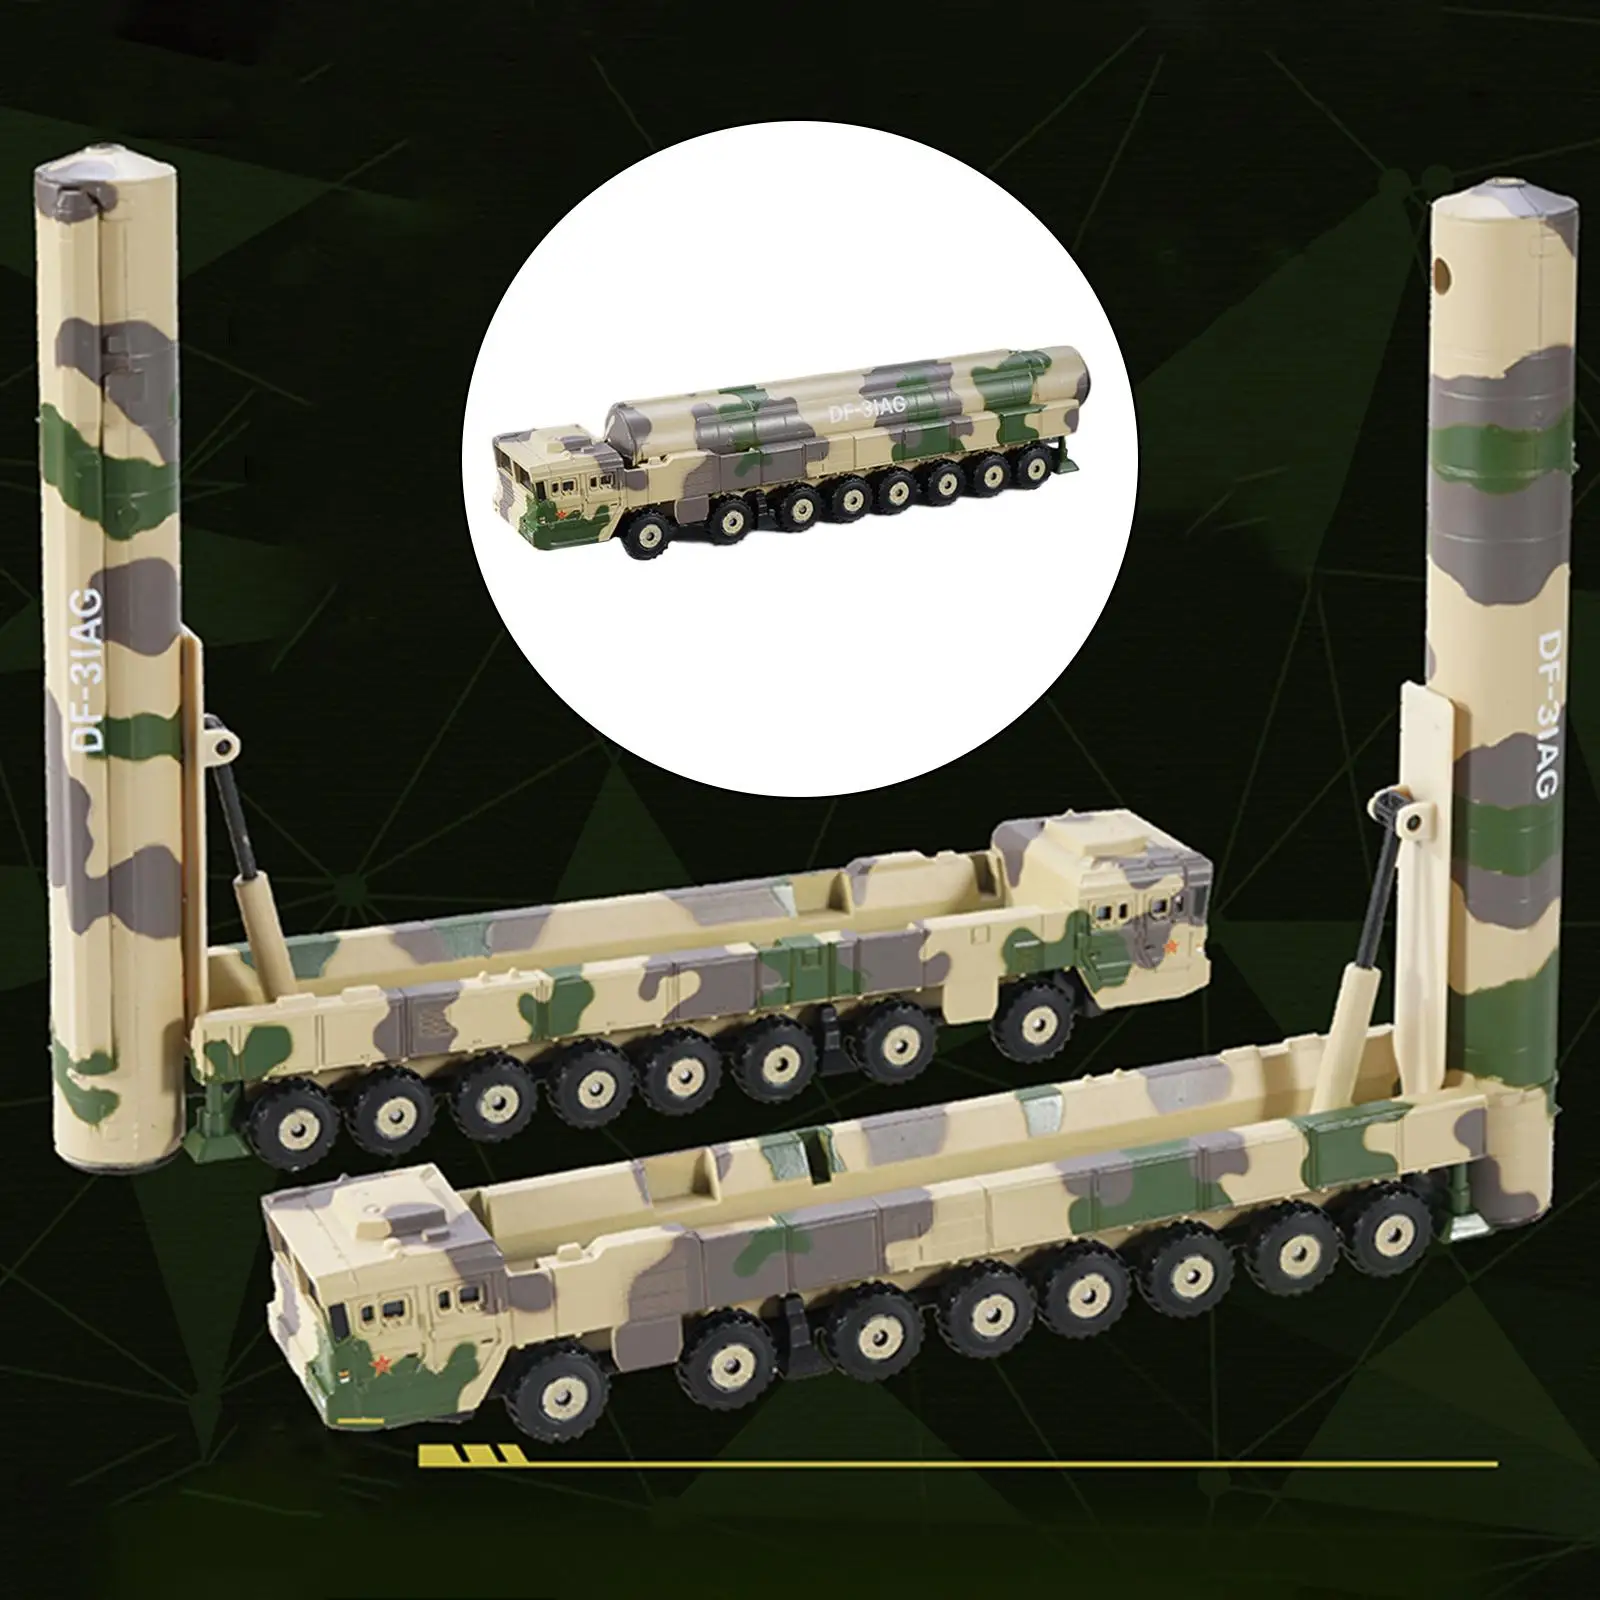 Simulation 1/100 Scale DF -31 Nuclear Missile Vehicle for Desktop Ornaments